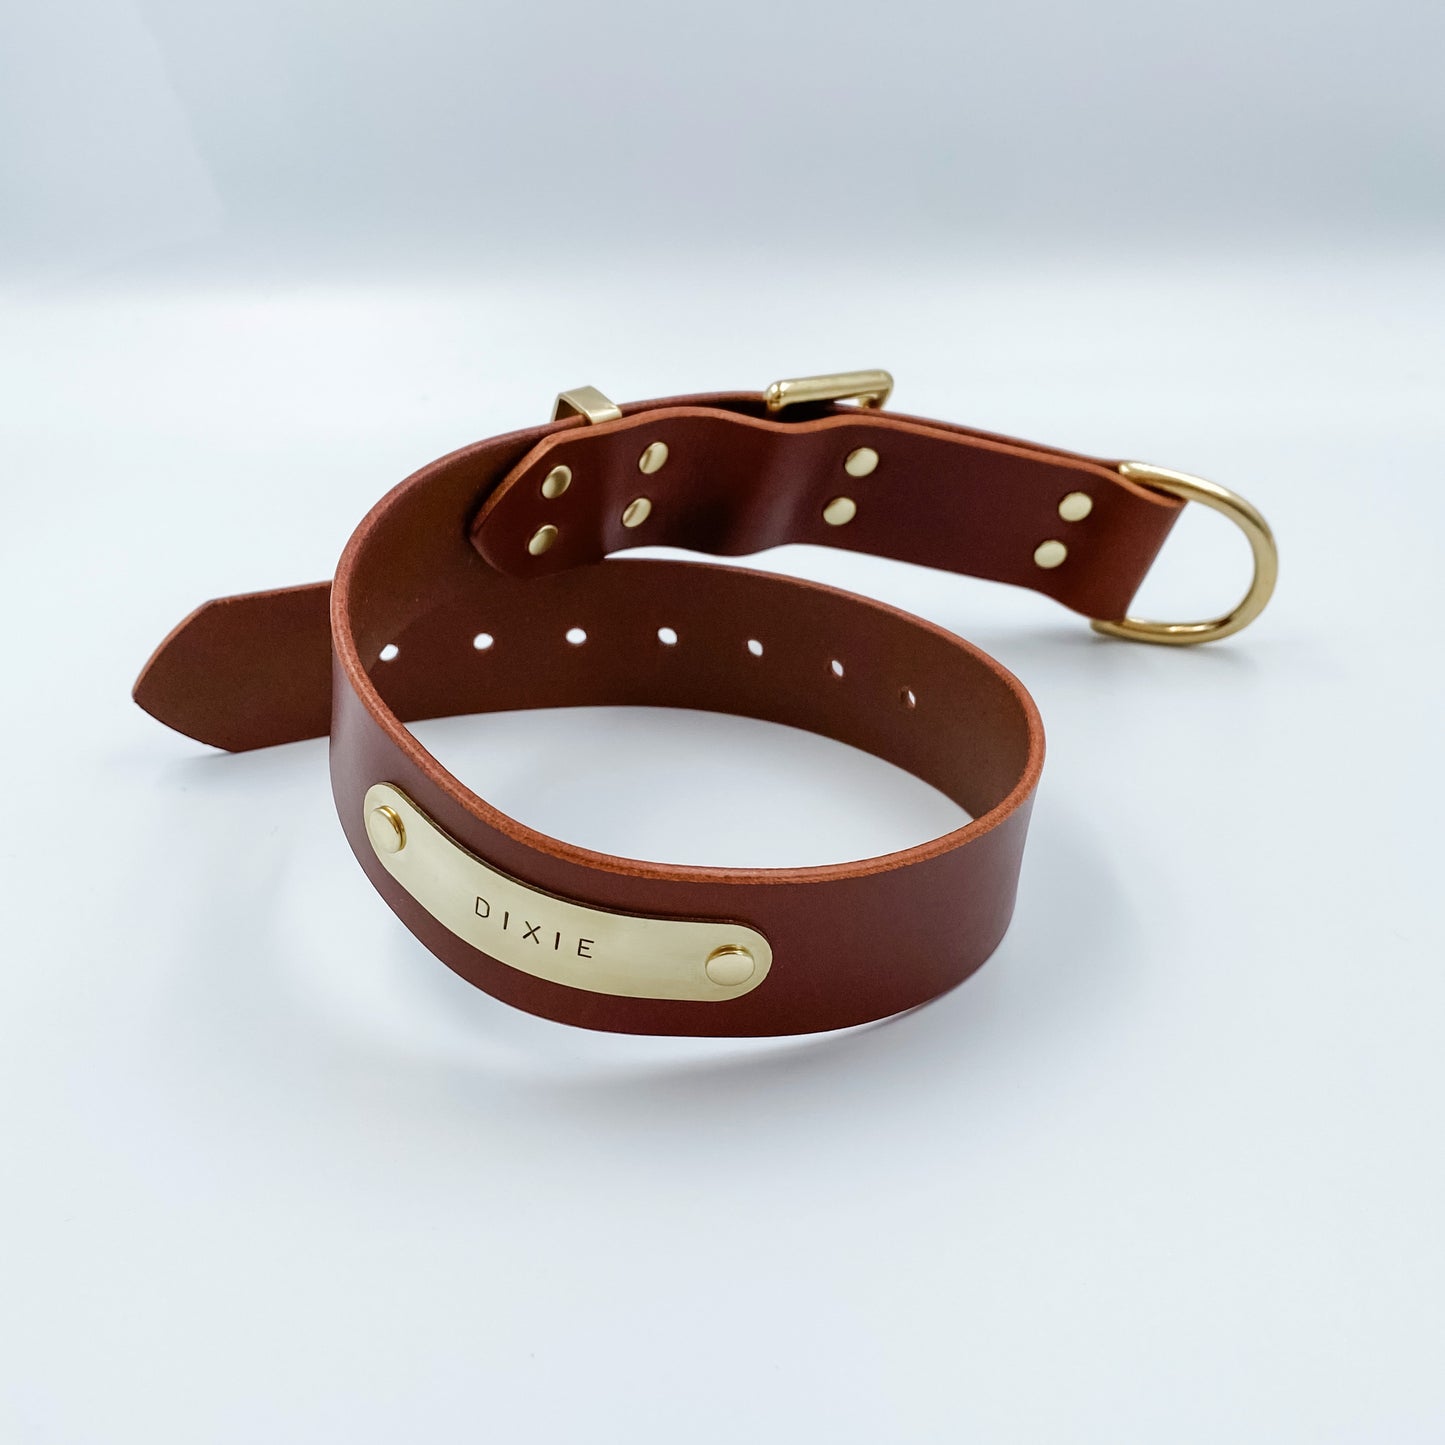 Genuine Leather - D-End Dog Collar